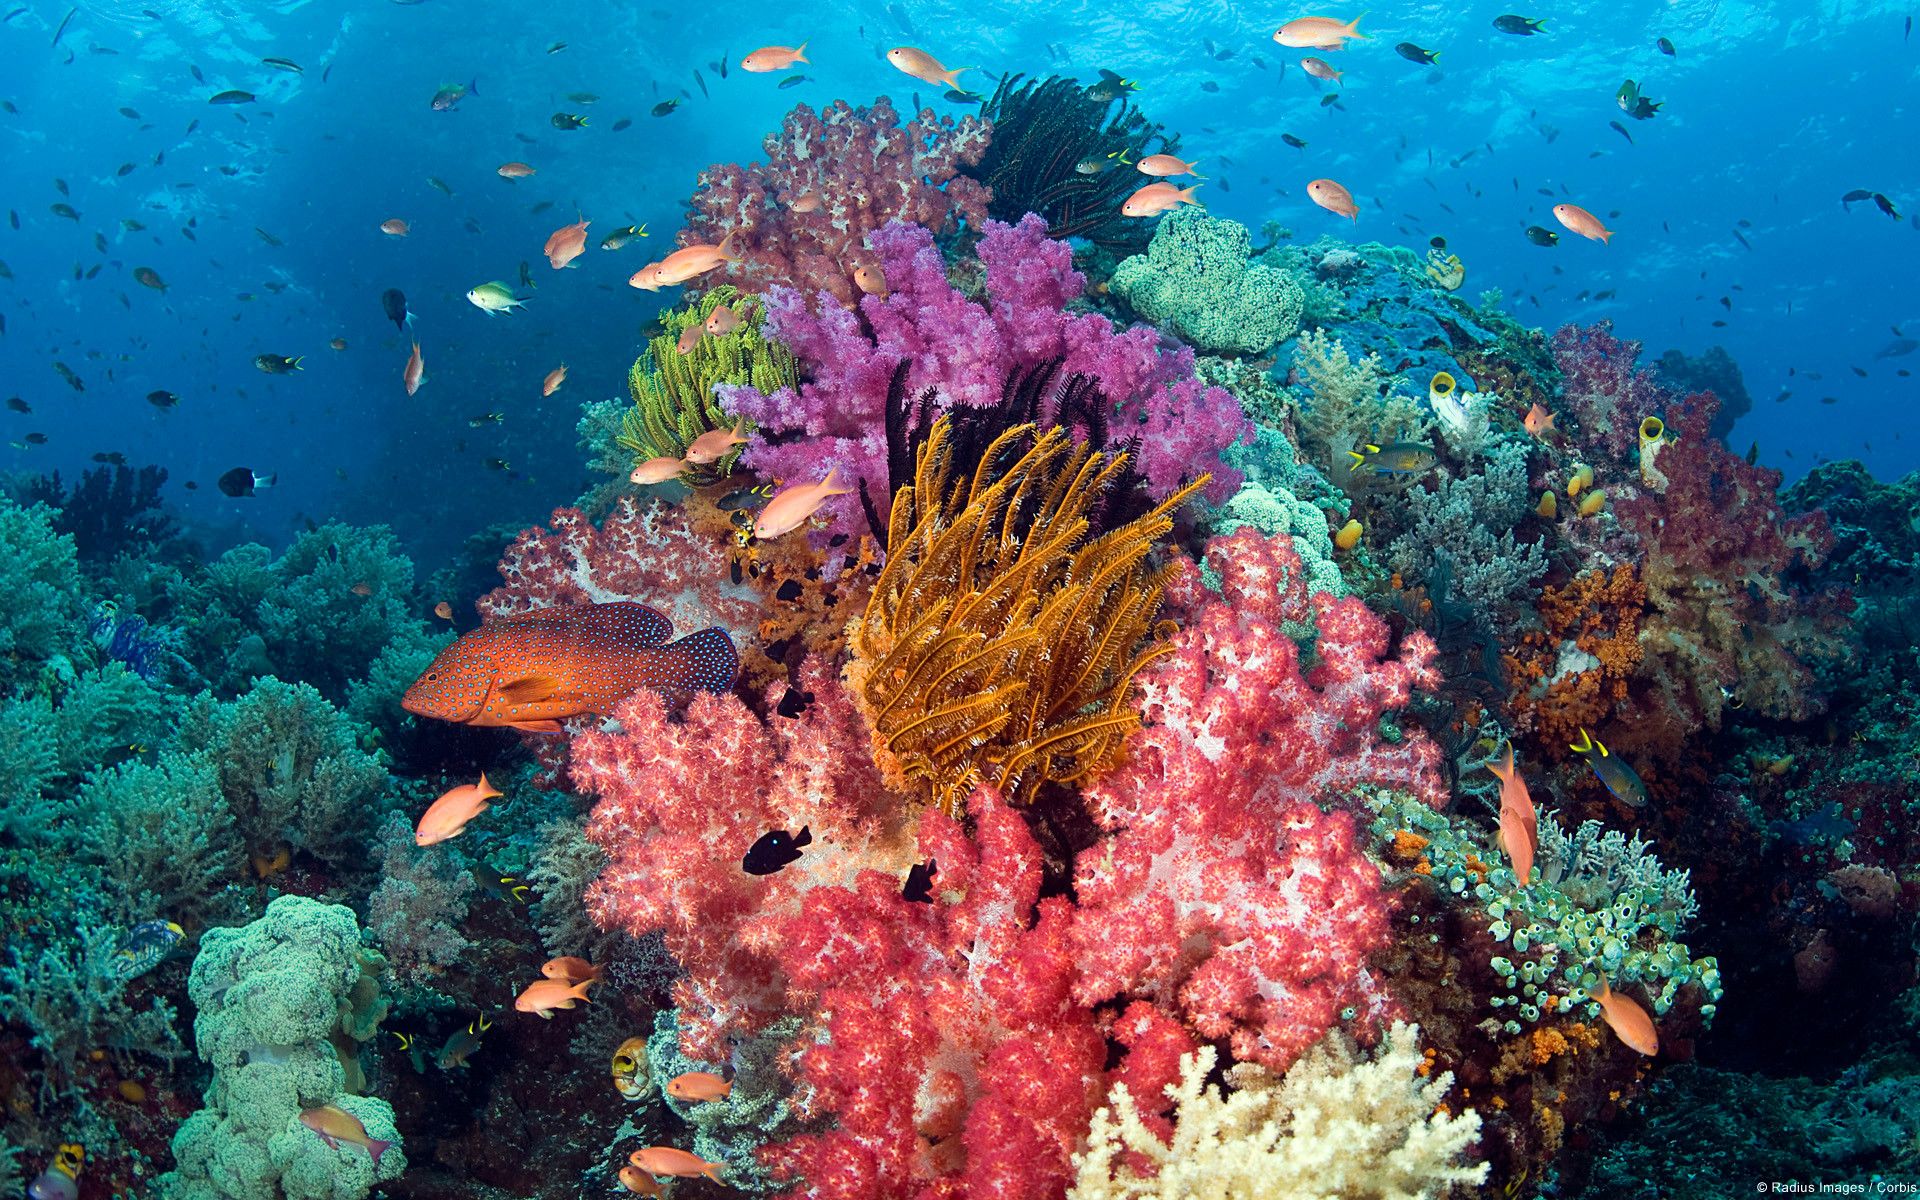 A coral reef with many different types of fish - Coral